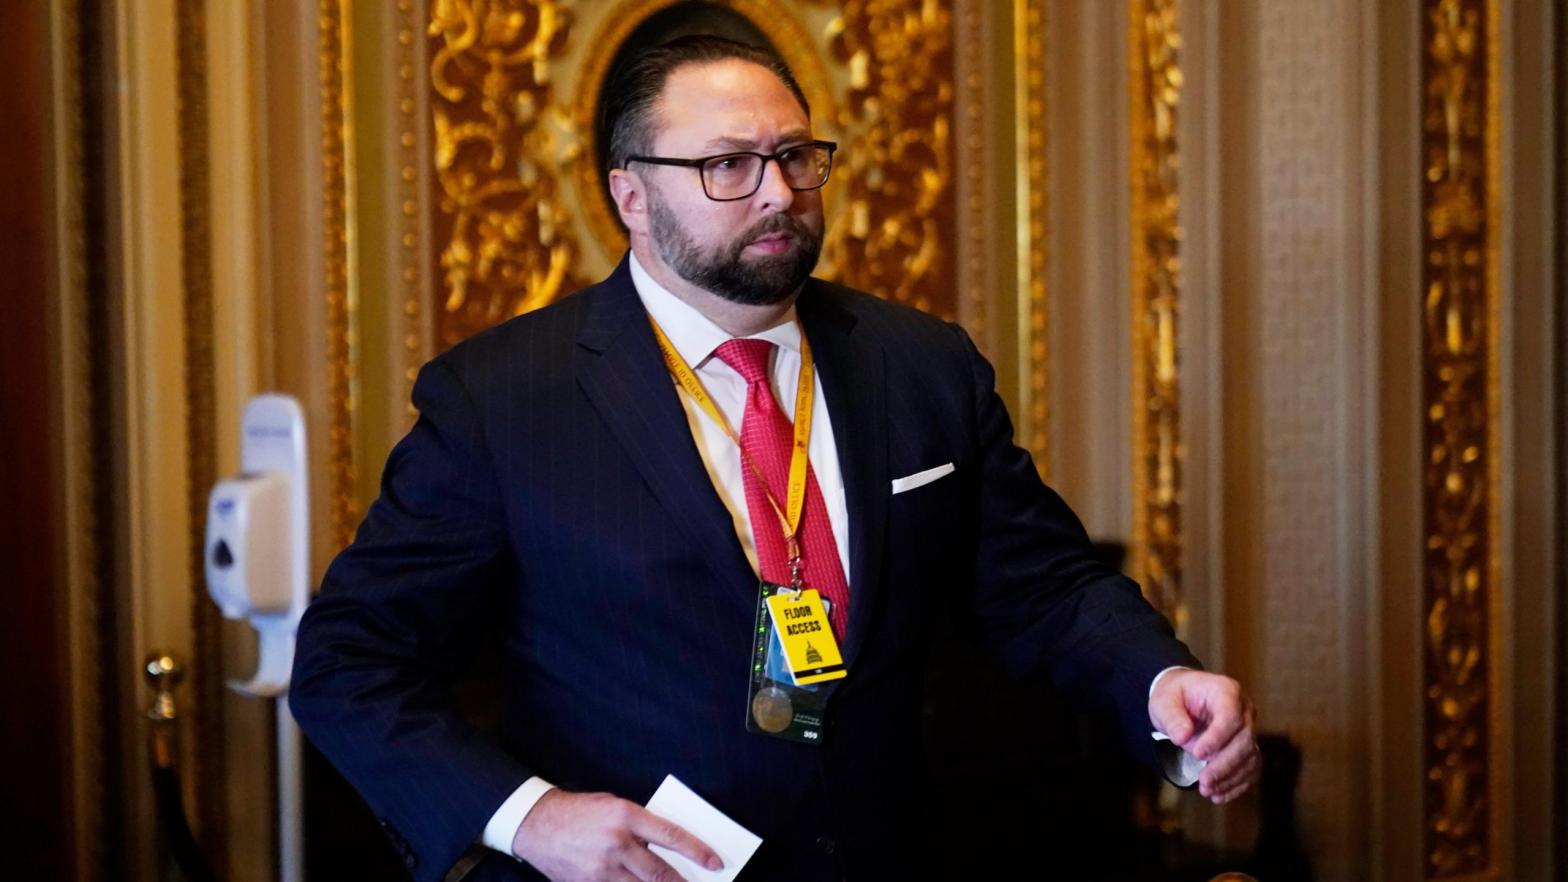 Trump aide Jason Miller at the U.S. Capitol on Feb. 9, 2021. (Photo: Andrew Harnik / AFP, Getty Images)